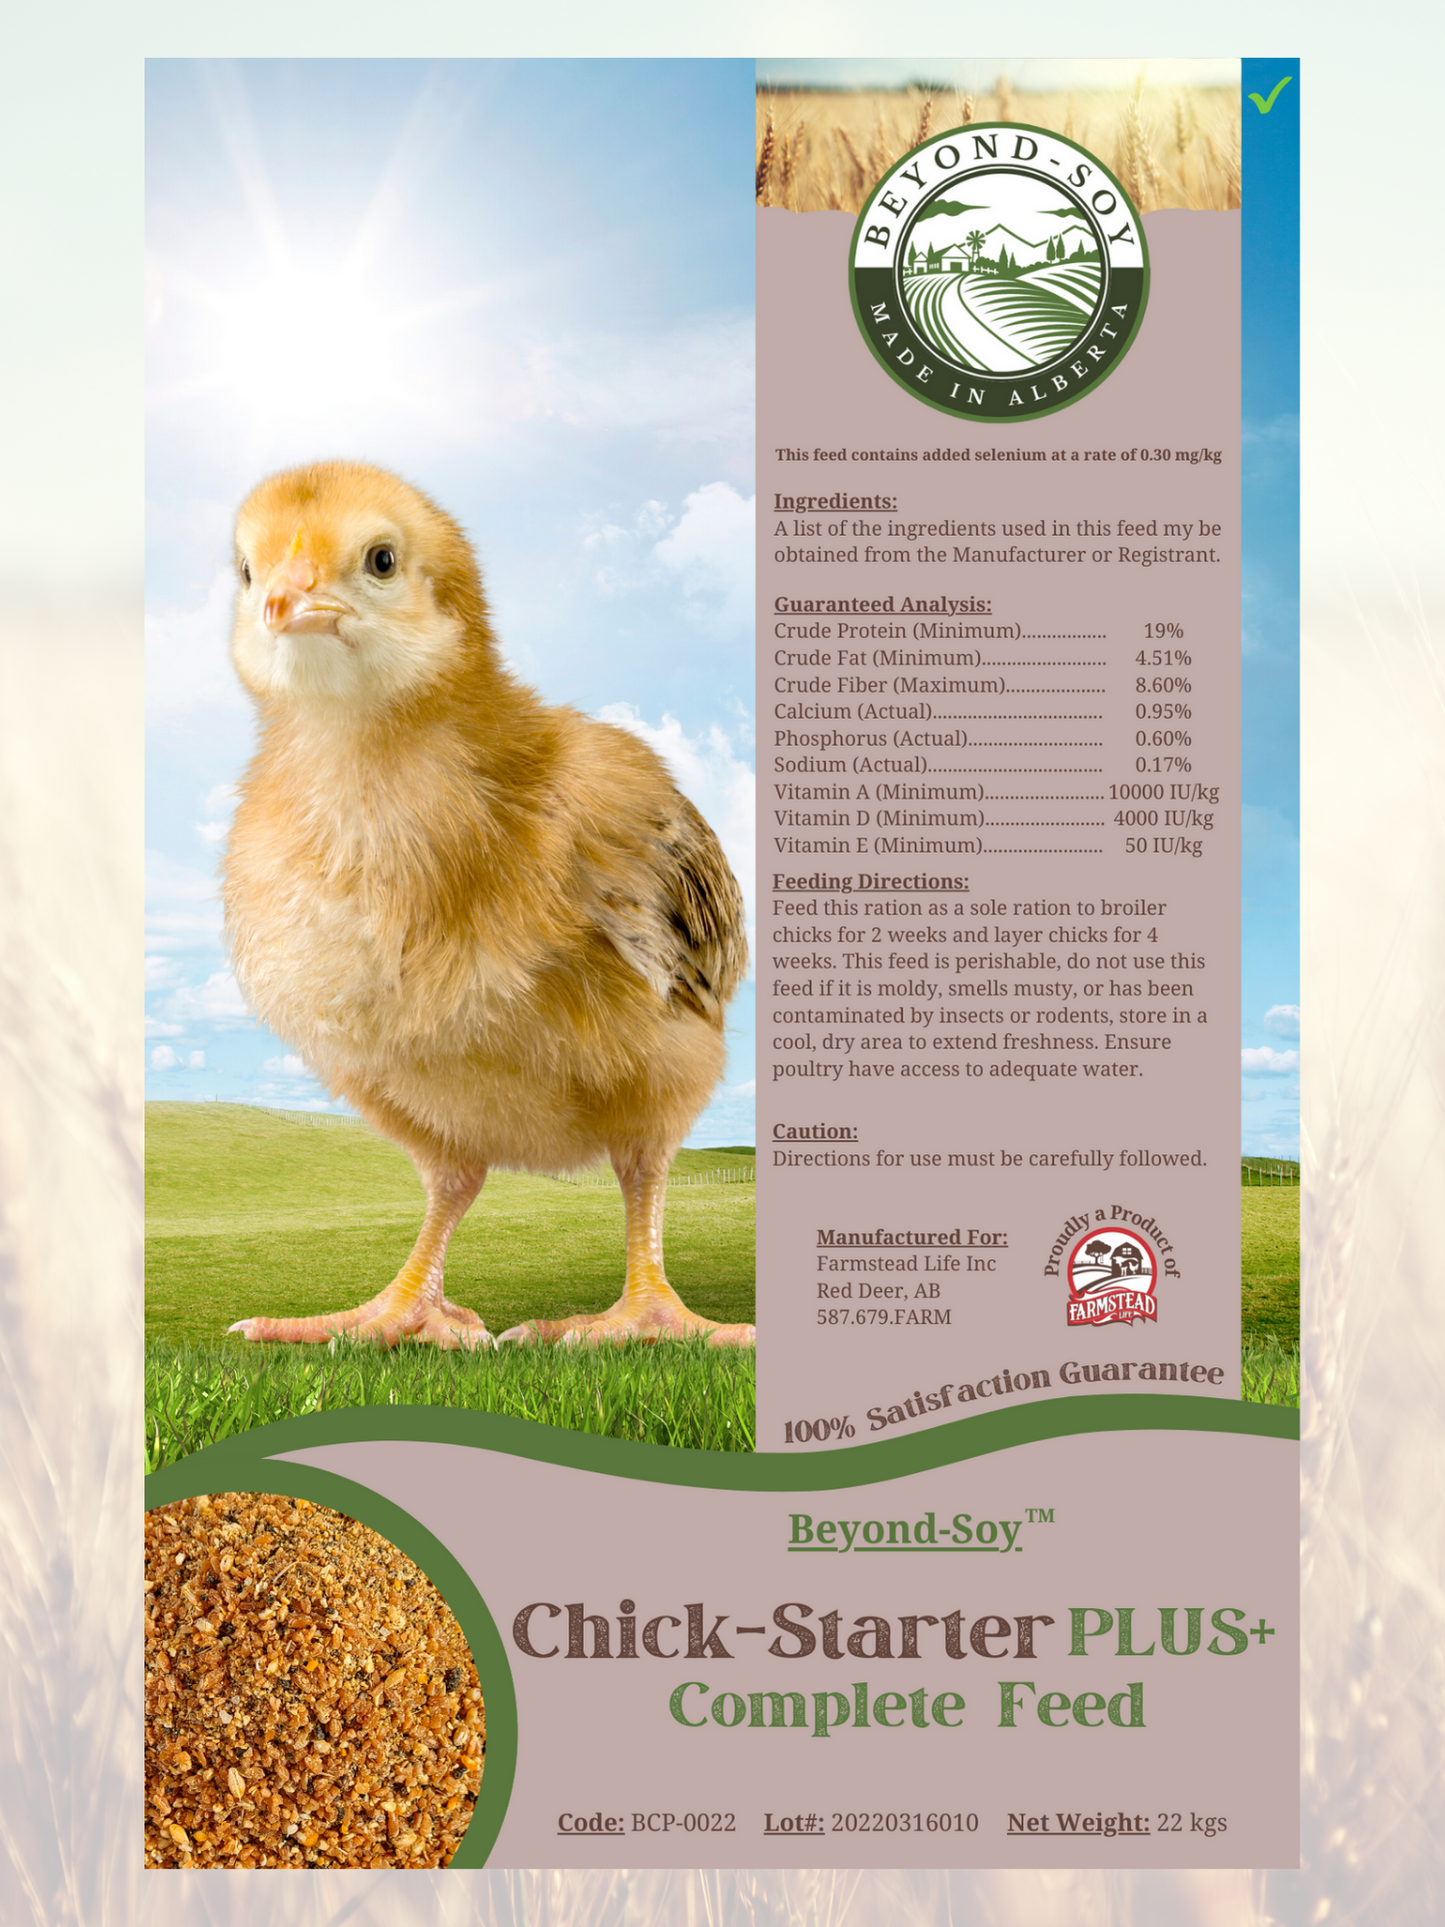 Chick Starter Plus - Beyond Soy - Farmstead Feeds